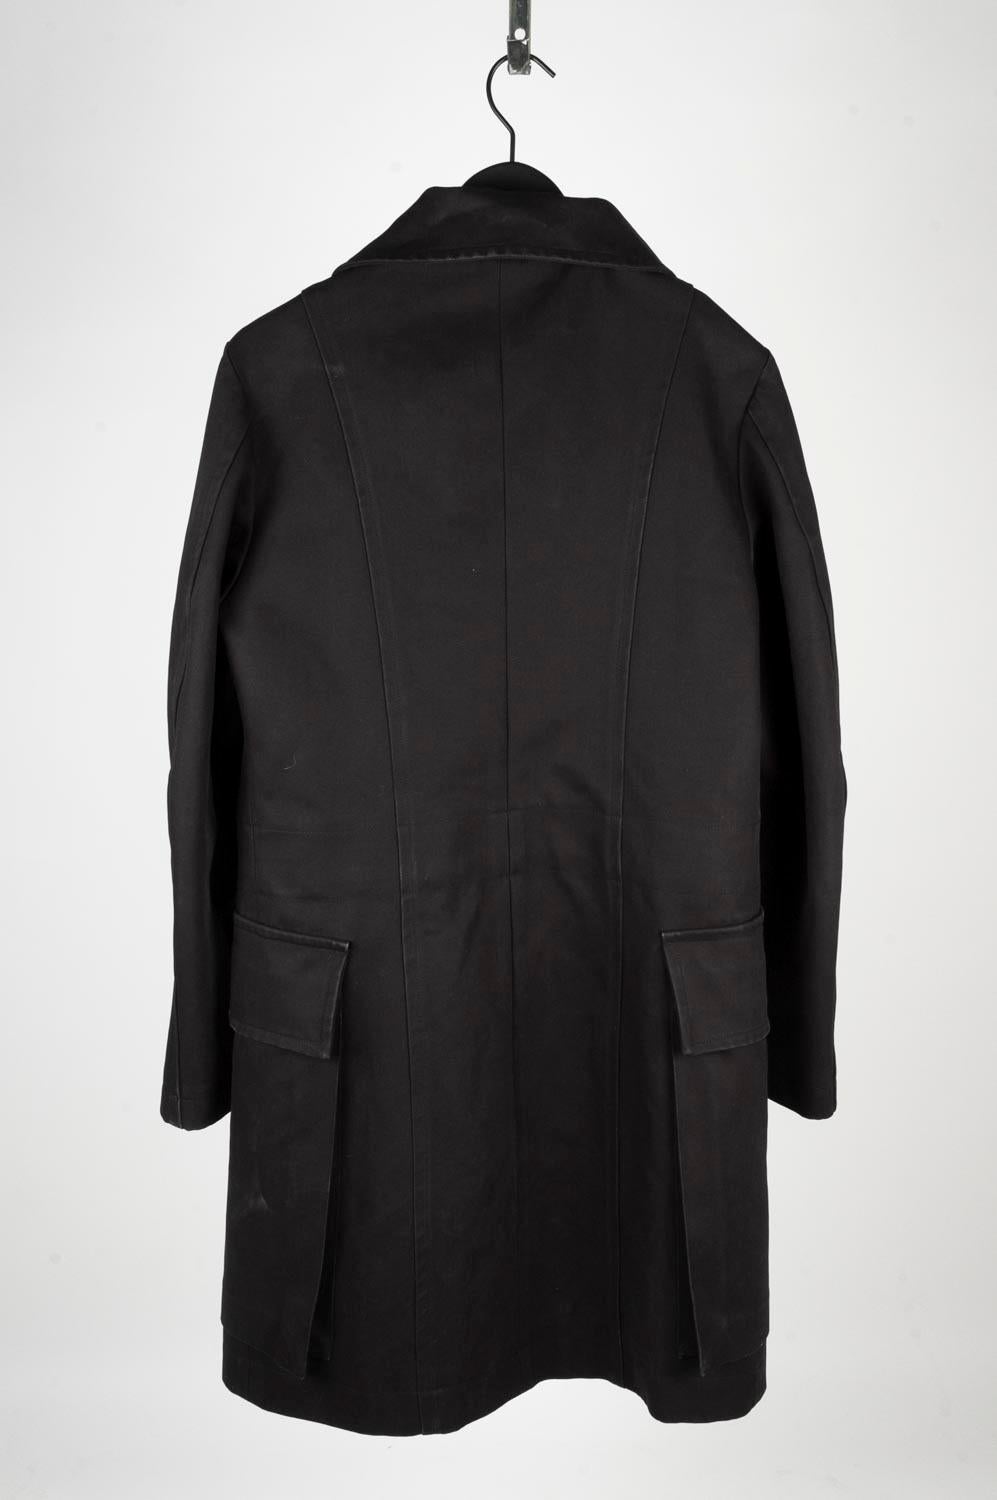 Yves Saint Laurent Men Coat by Tom Ford Rive Gauche Size 50 (Large), S550 For Sale 1